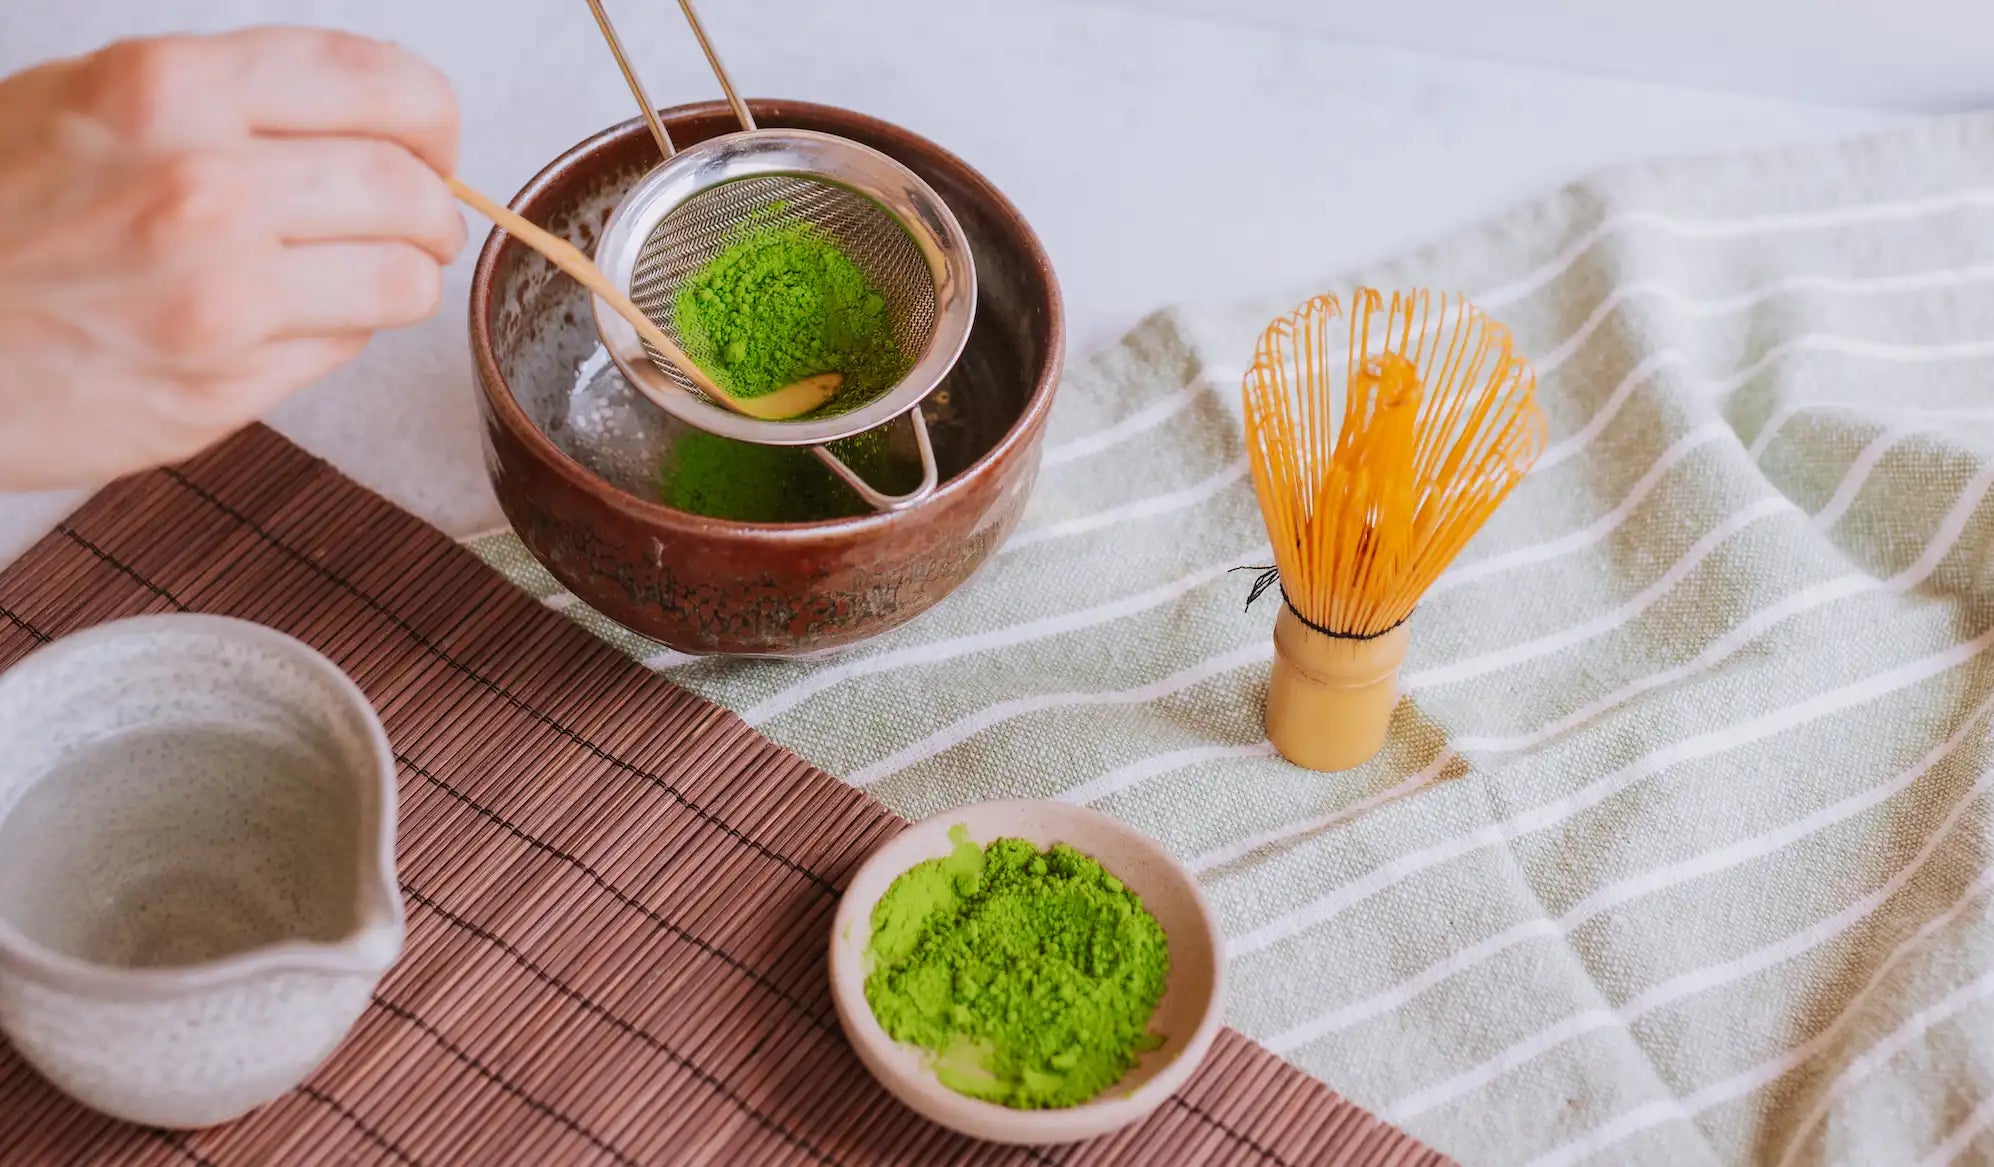 https://www.saratogateaandhoney.com/cdn/shop/files/Matcha_teaware_with_hand_sifting_matcha_into_a_chawan_with_a_chashaku_and_chasen_in_the_foreground.webp?v=1680788371&width=3840